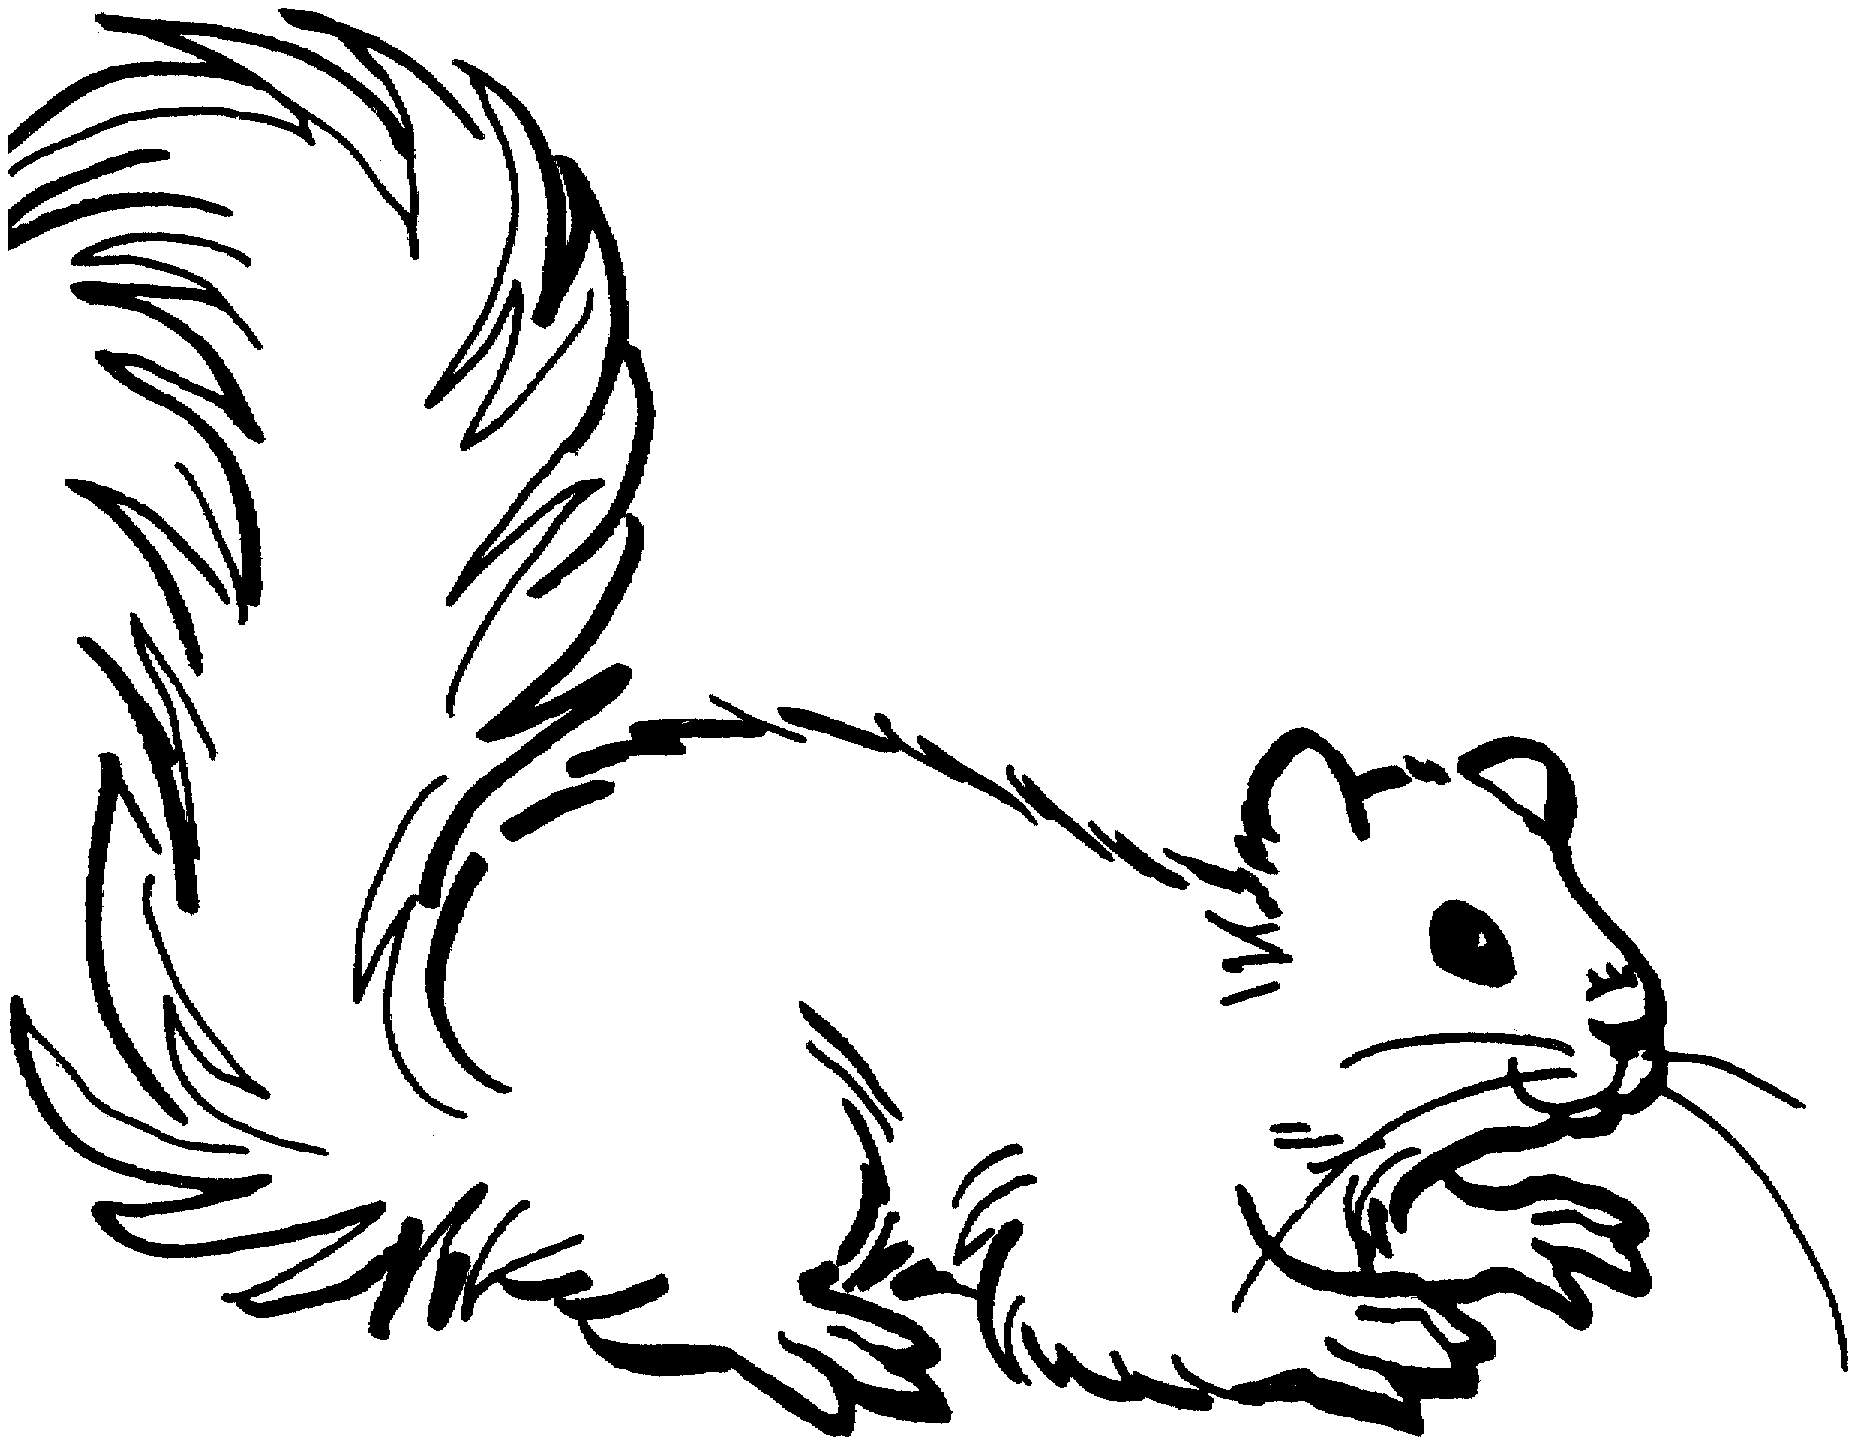 Flying Squirrel Coloring Page Cliparts.co